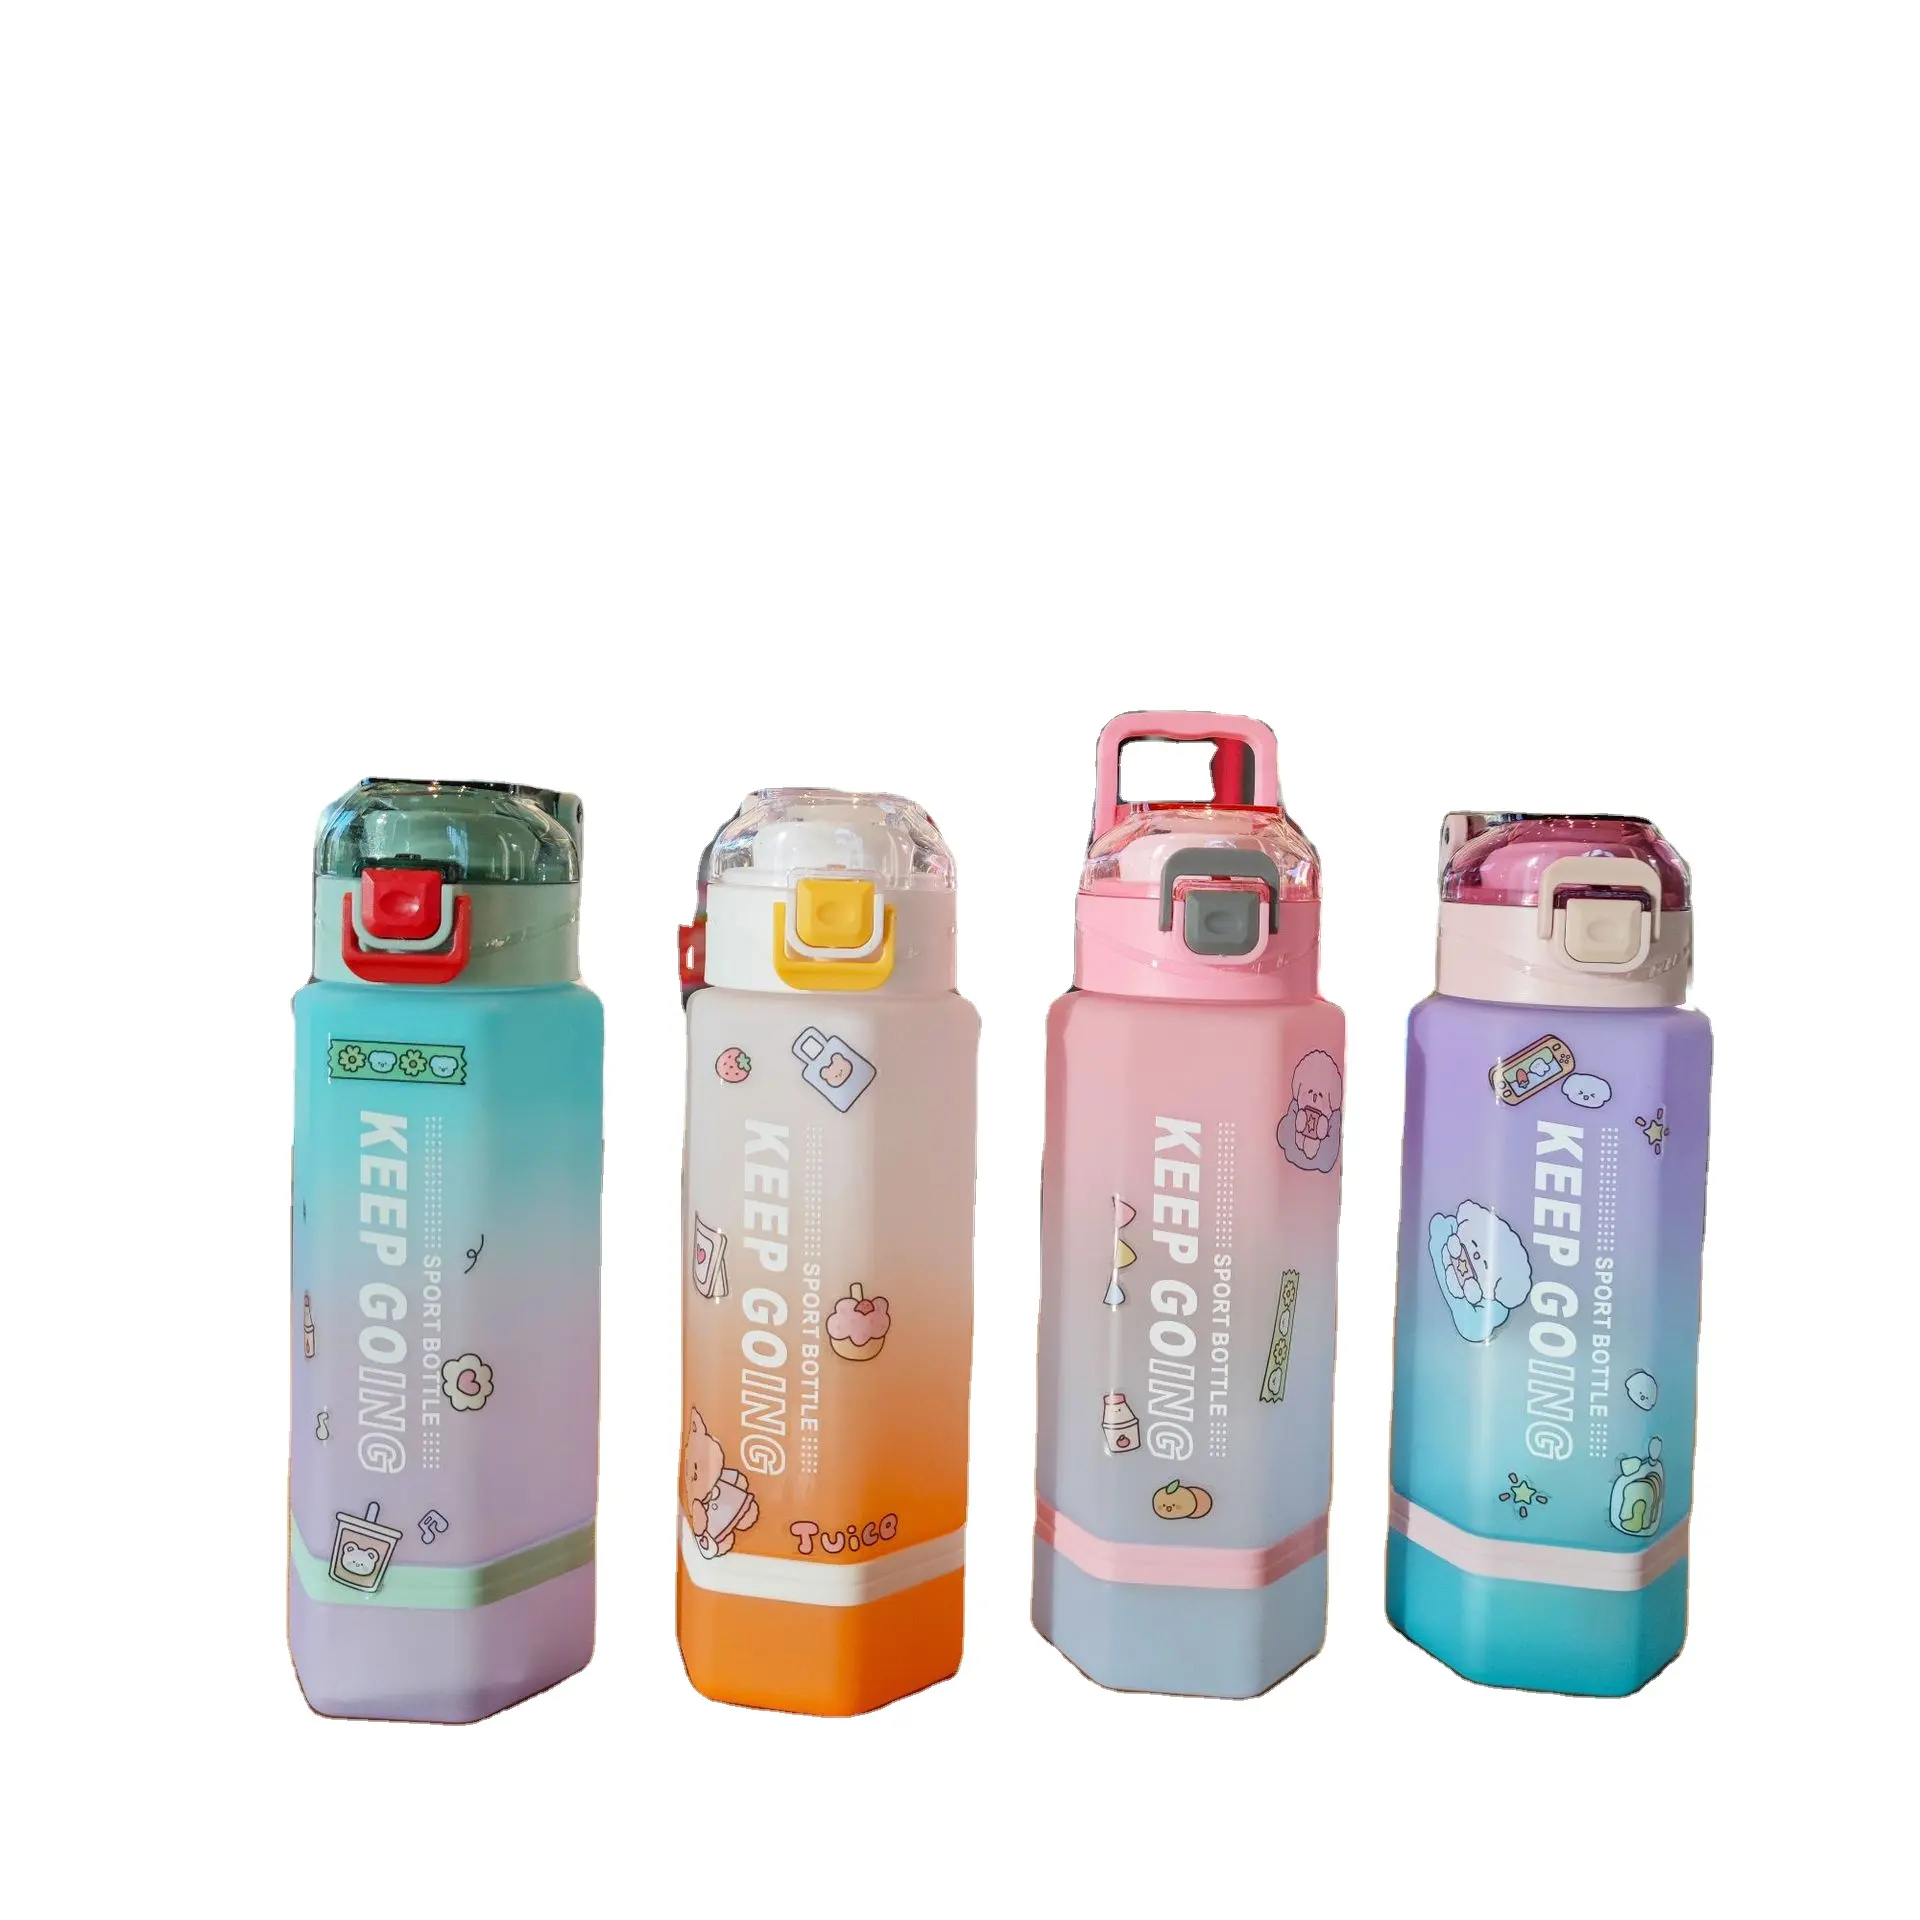 Gradient Frosted Hexagonal Creative Plastic Water Bottle Portable BPA Free Bottle With Handle And Tea Infuser